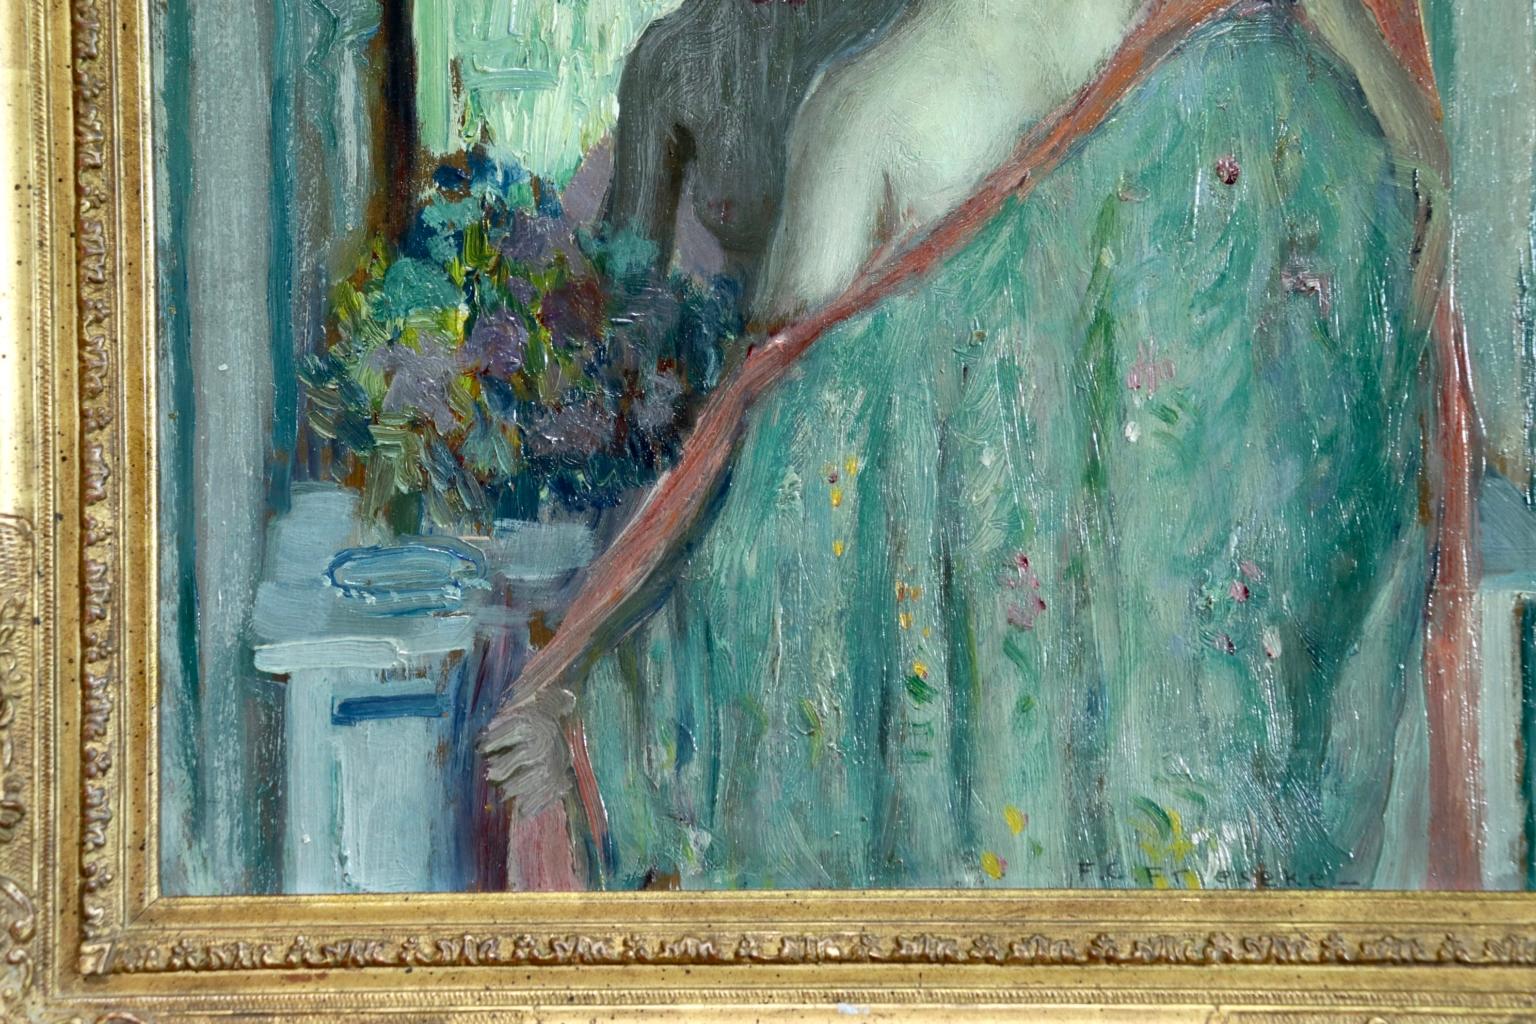 Reflections - Girl in a Mirror - American Impressionist Oil - Frederick Frieseke - Gray Nude Painting by Frederick Carl Frieseke